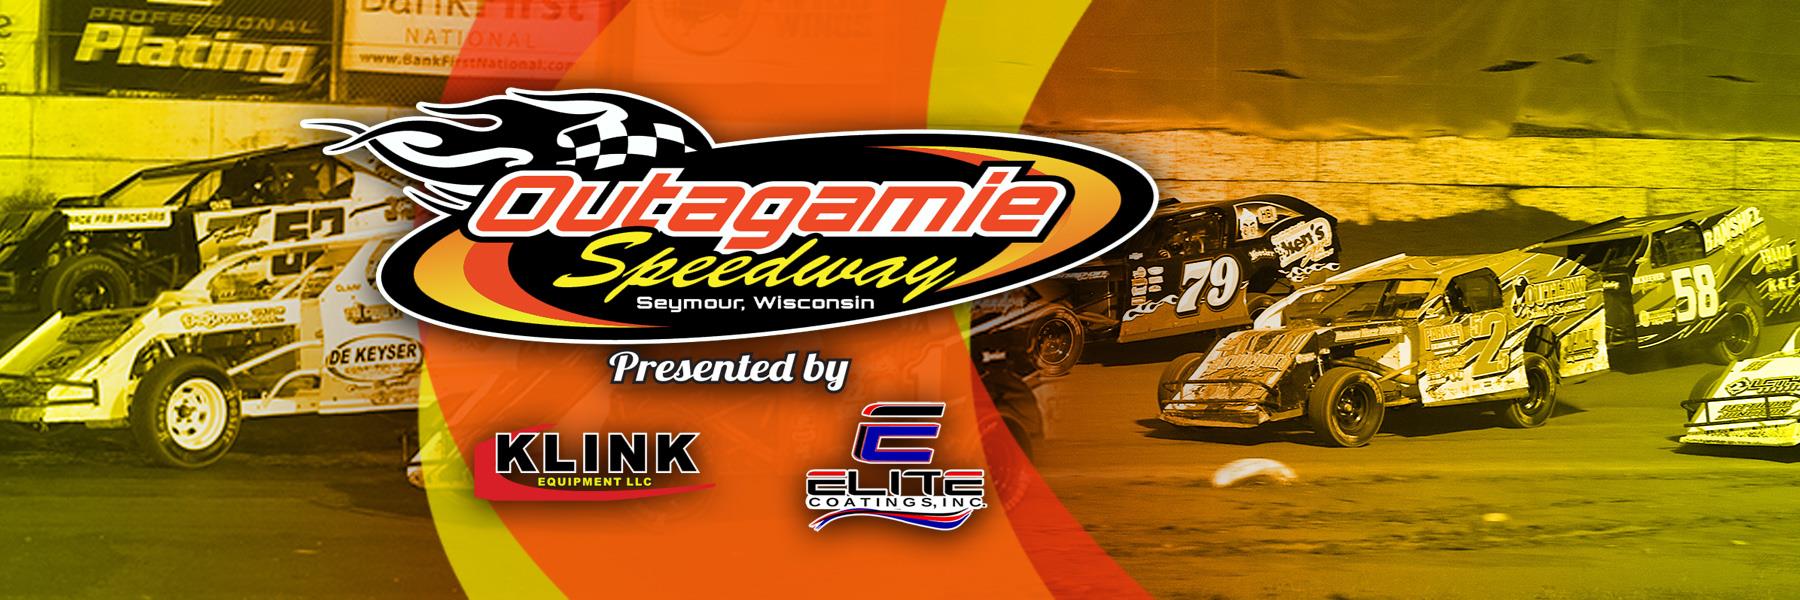 7/23/2021 - Outagamie Speedway